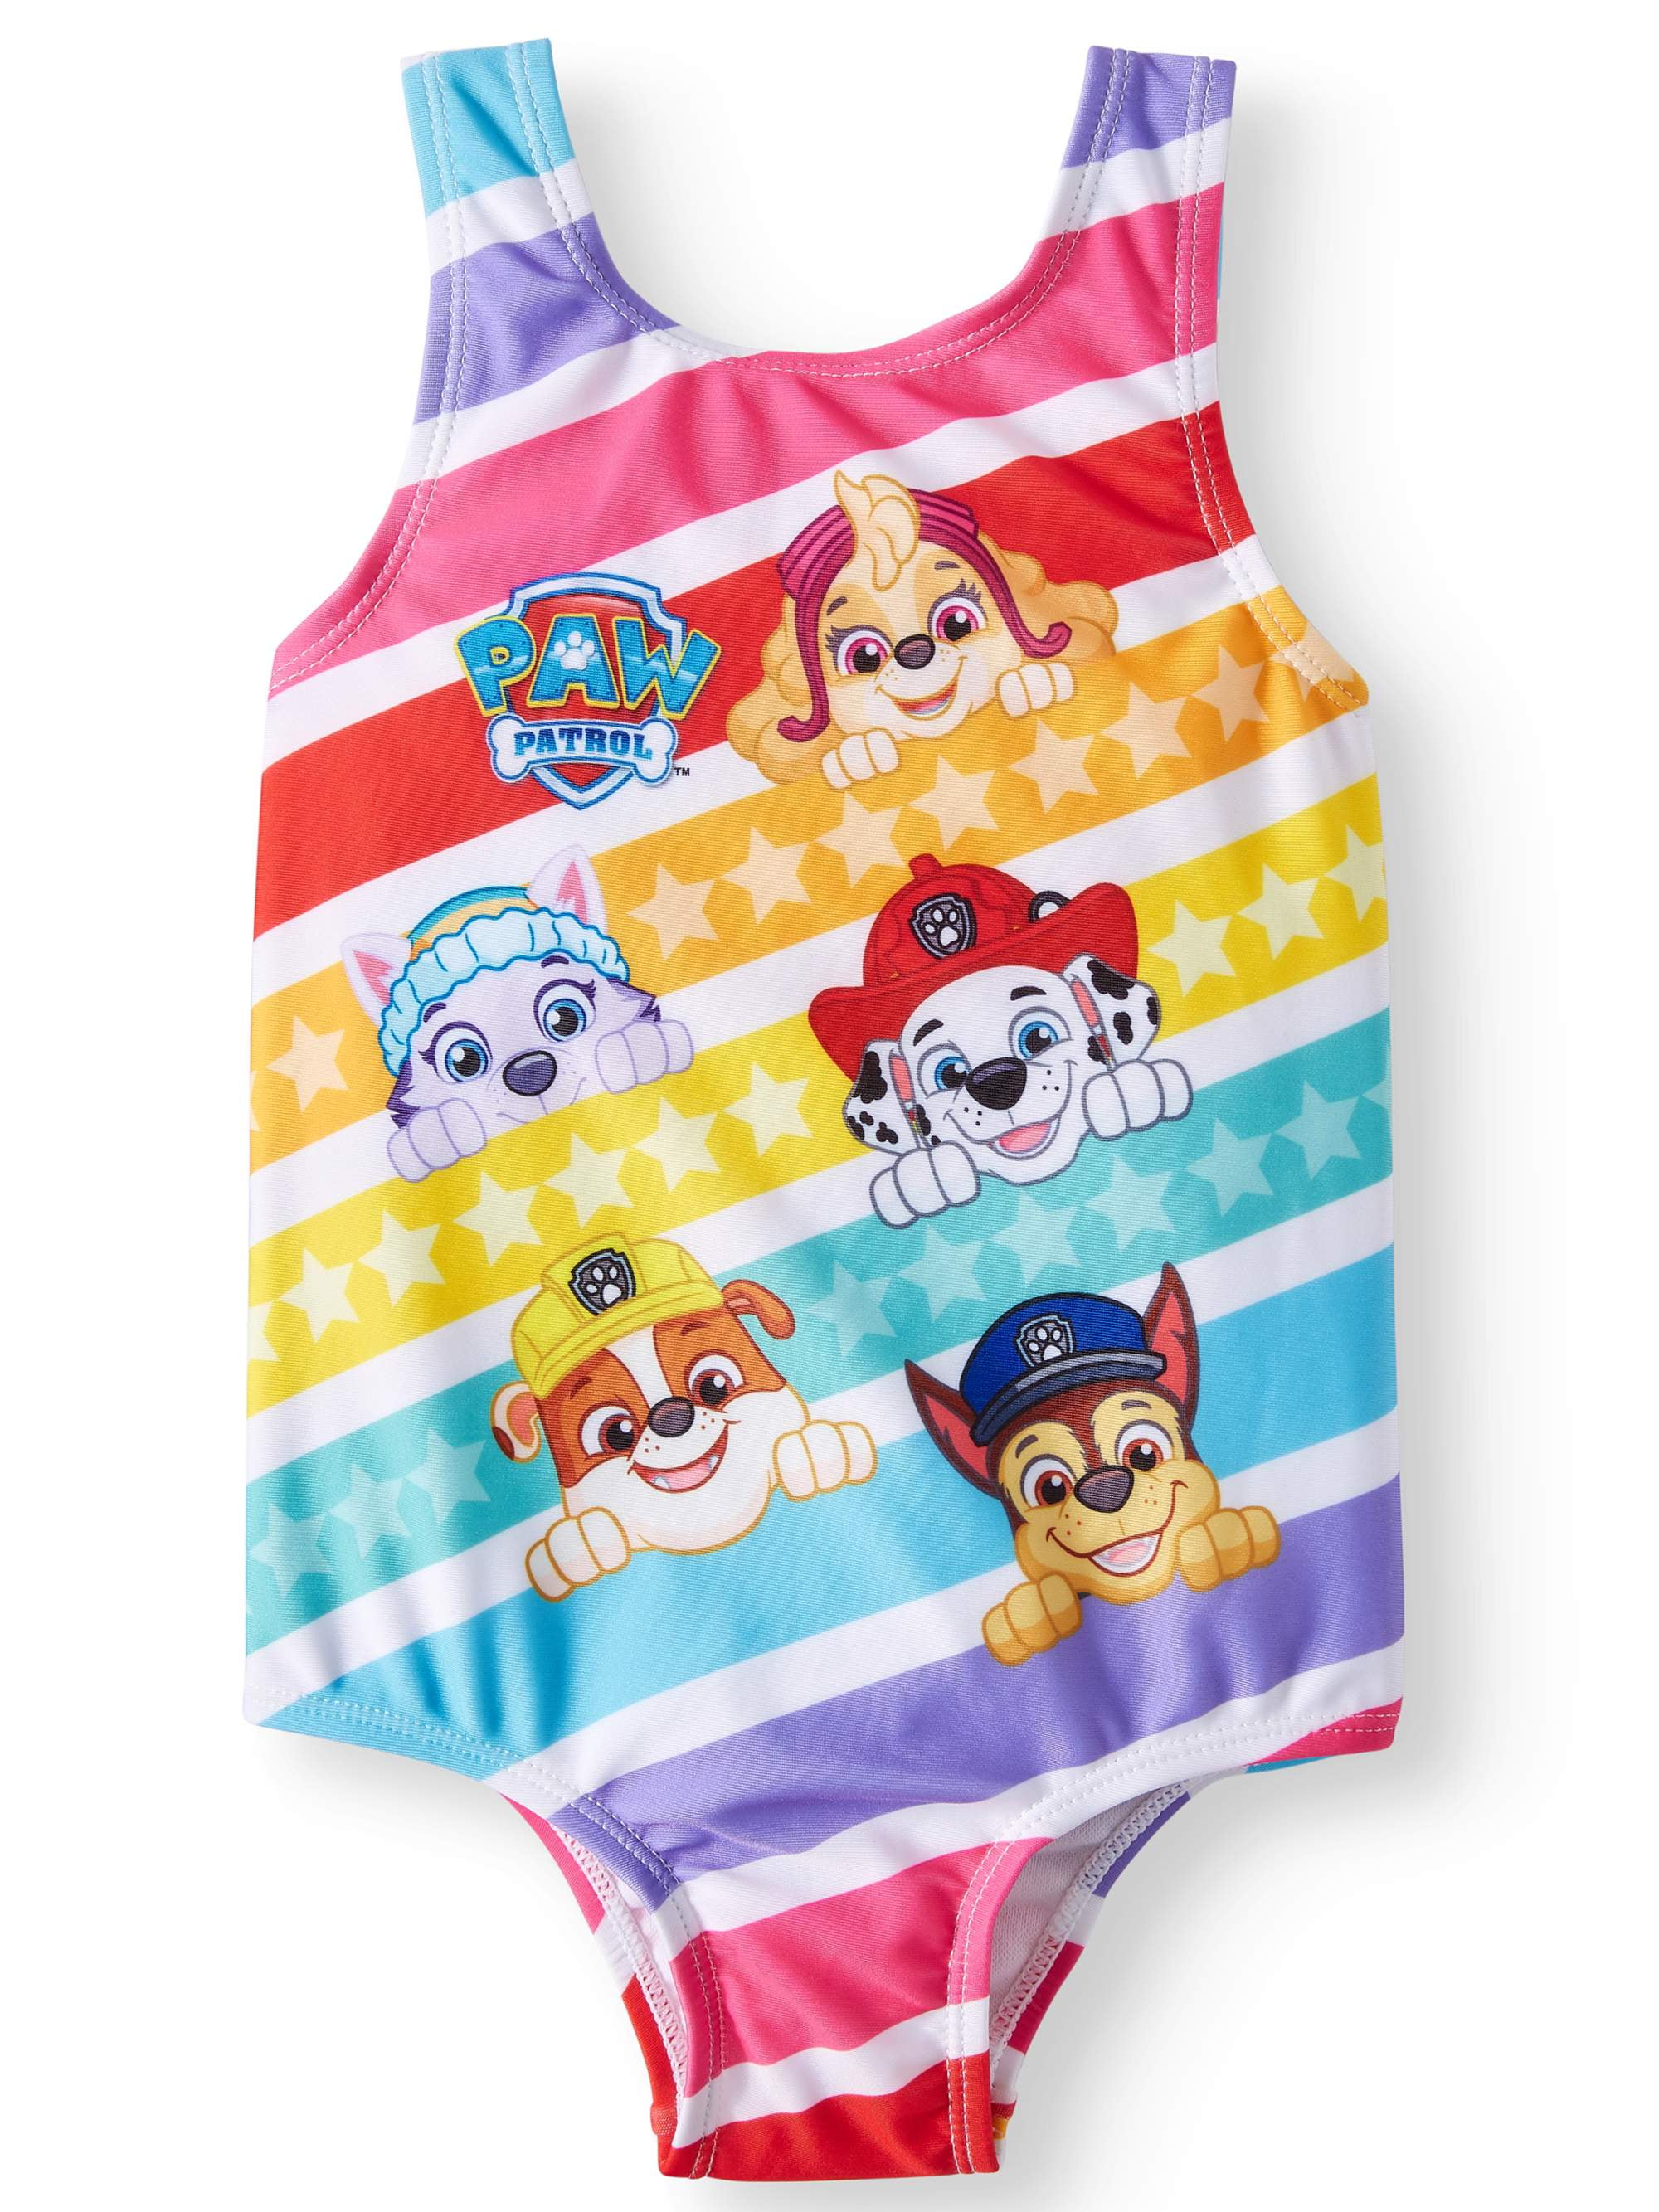 Skye Character Official Girls Swimsuits One Piece Swimwear 2-6 Years Nickelodeon Paw Patrol Fruits or Sea Patrol Themes 